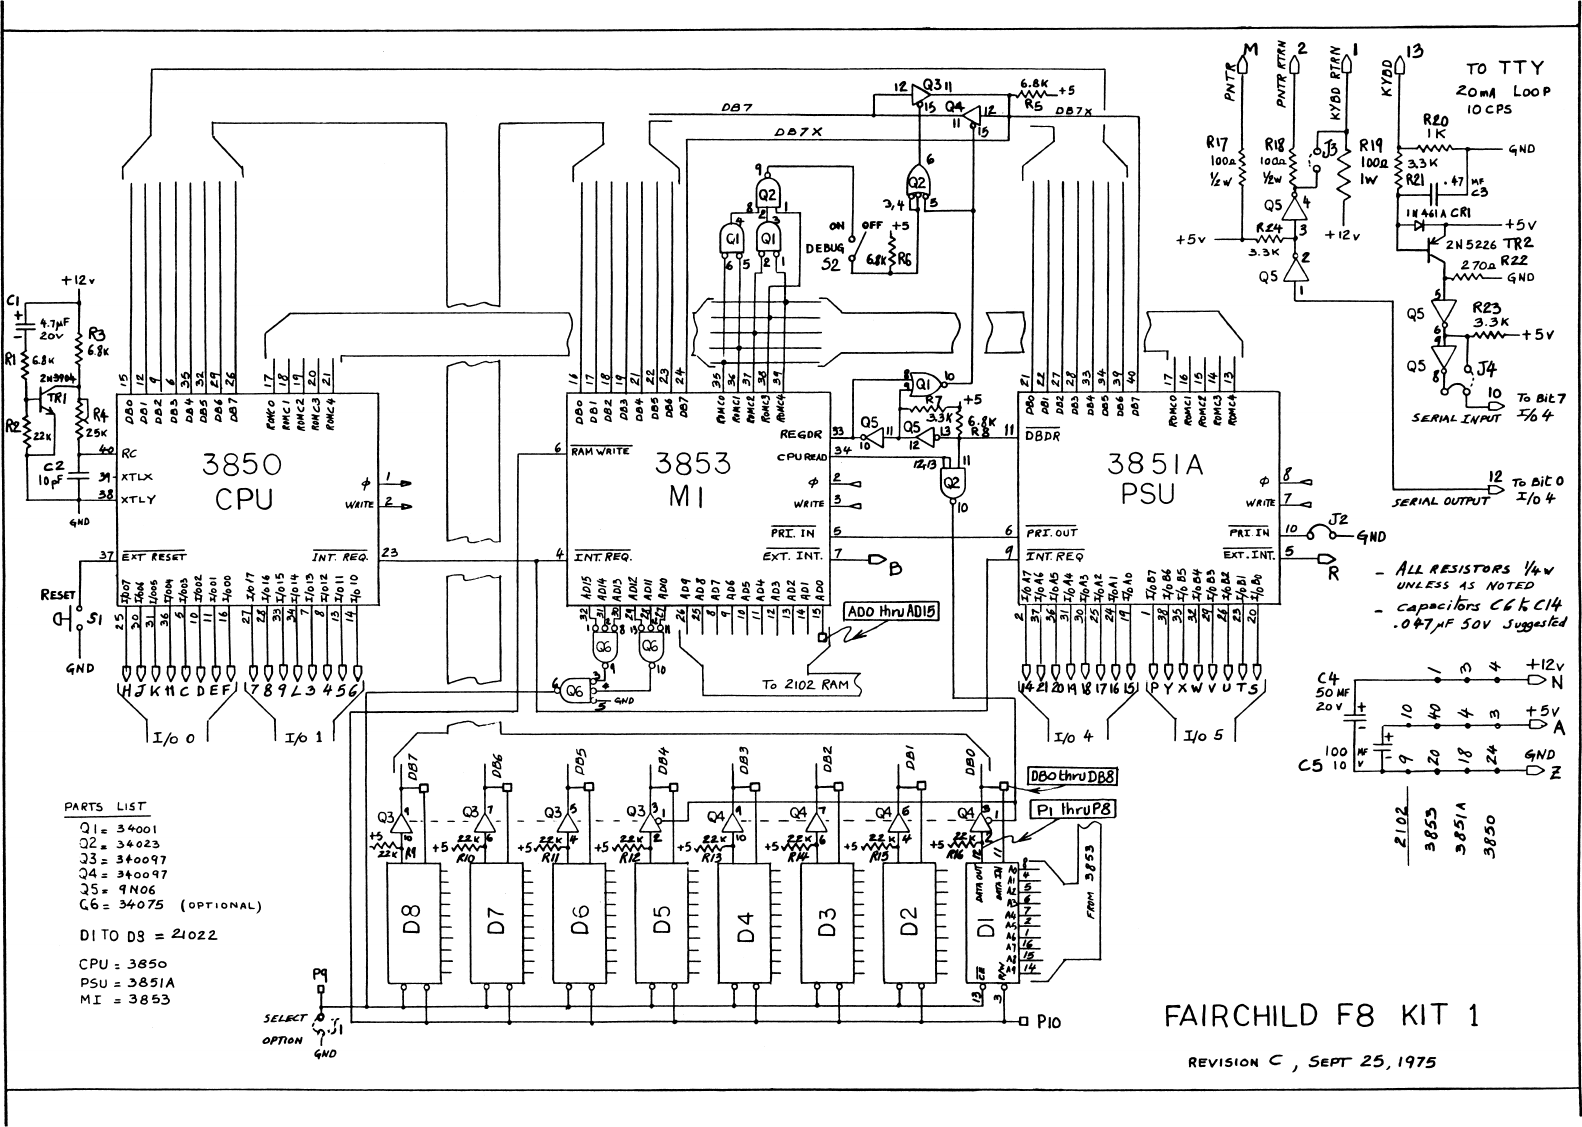 Page 1 of 1 - Fairchild F8 Kit 1 Schematic, Revision C, 25-Sep-1975 (1200dpi) Fairchild_F8_Kit_1_schematic_rev_C_1975 Schematic Rev C 1975